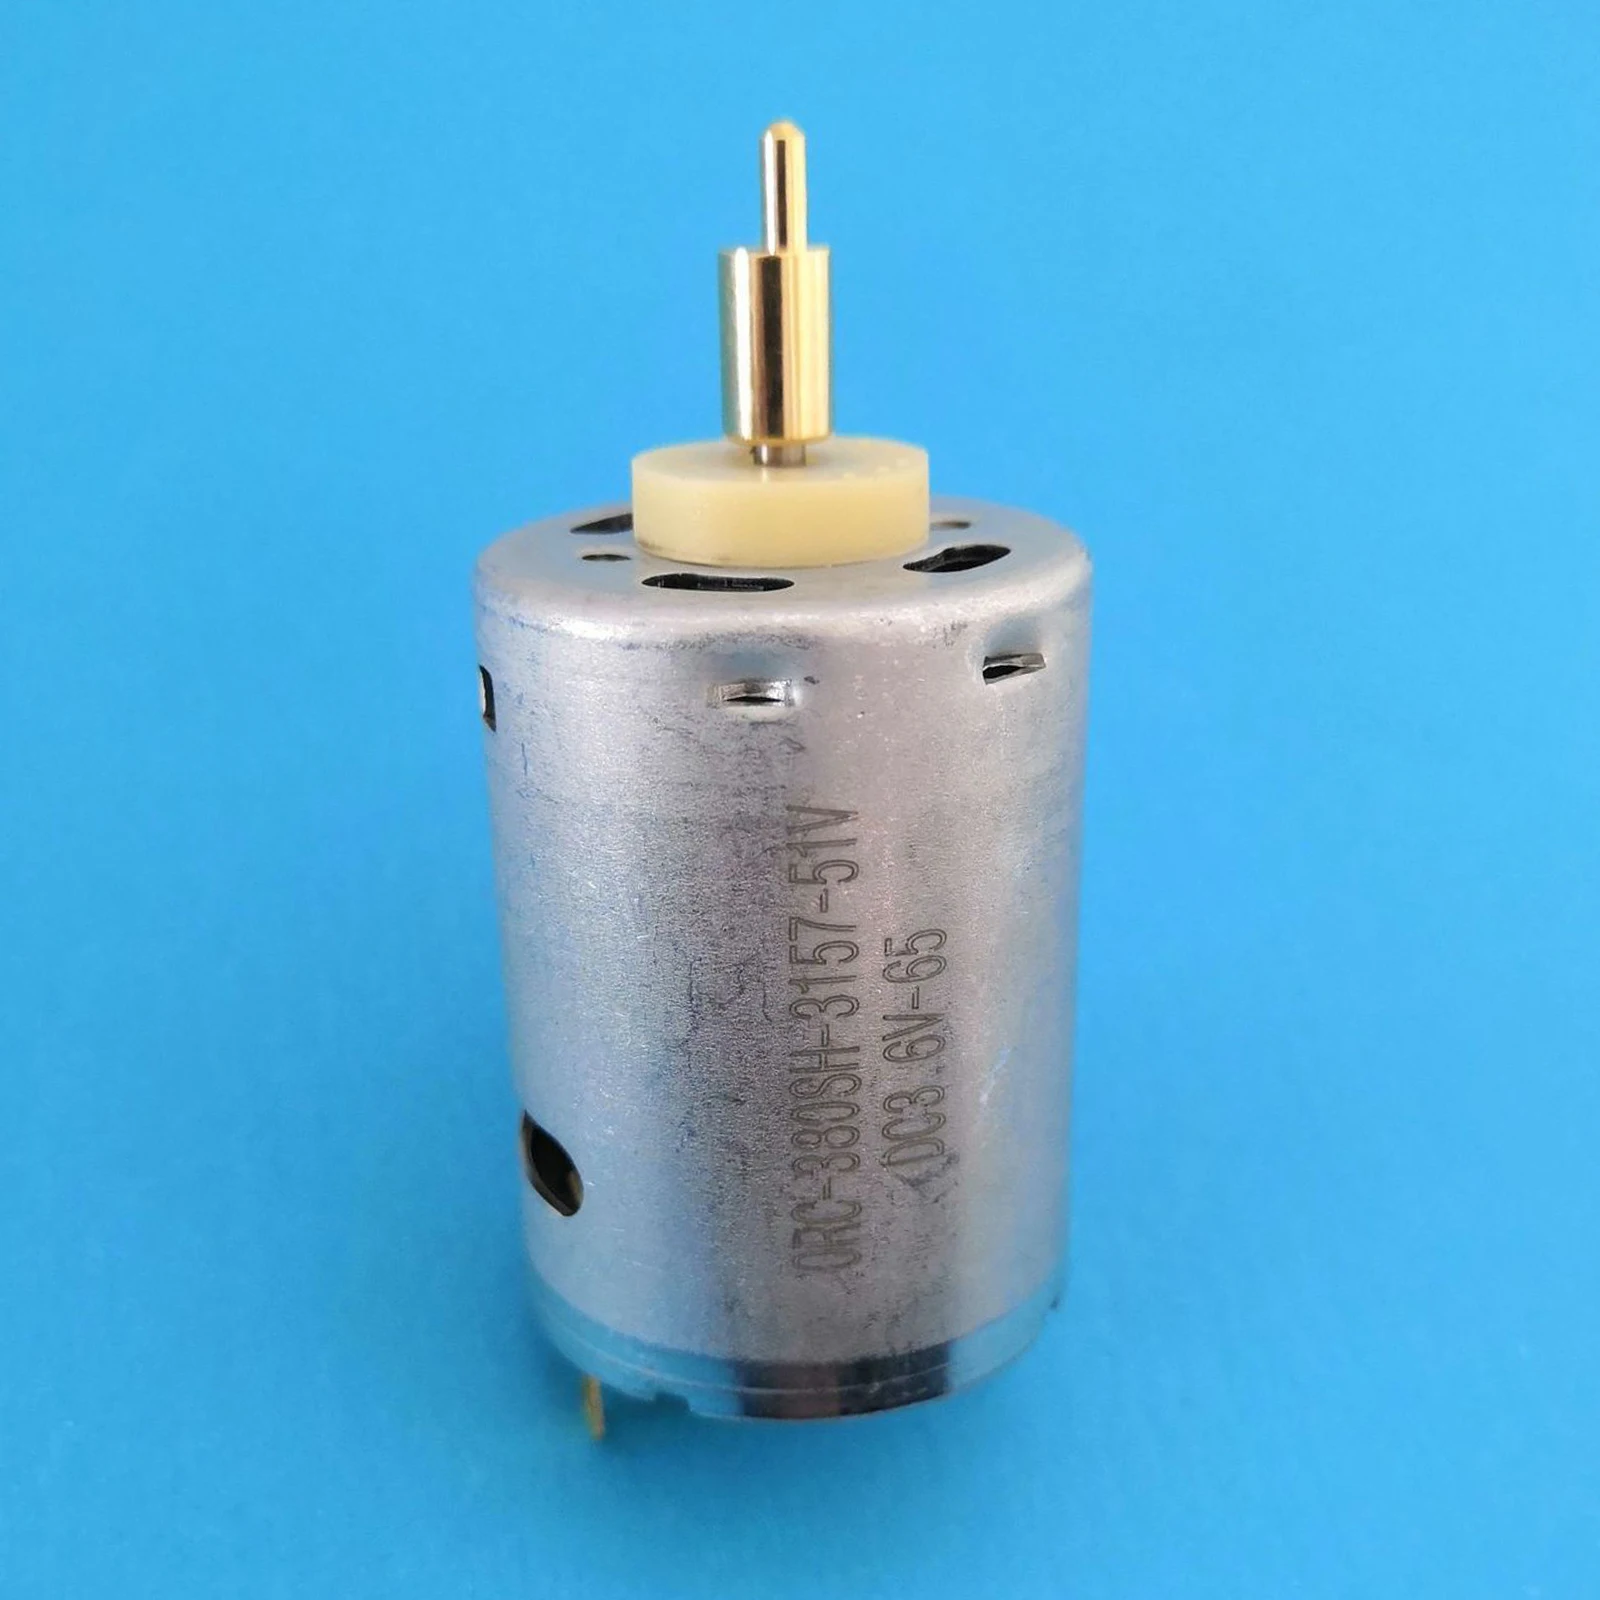 Hair Clipper Motor Replacement 6500 RPM Fit for Wahl 8148 8591 Accessories Replacement Motor Hair Clipper Repair Parts